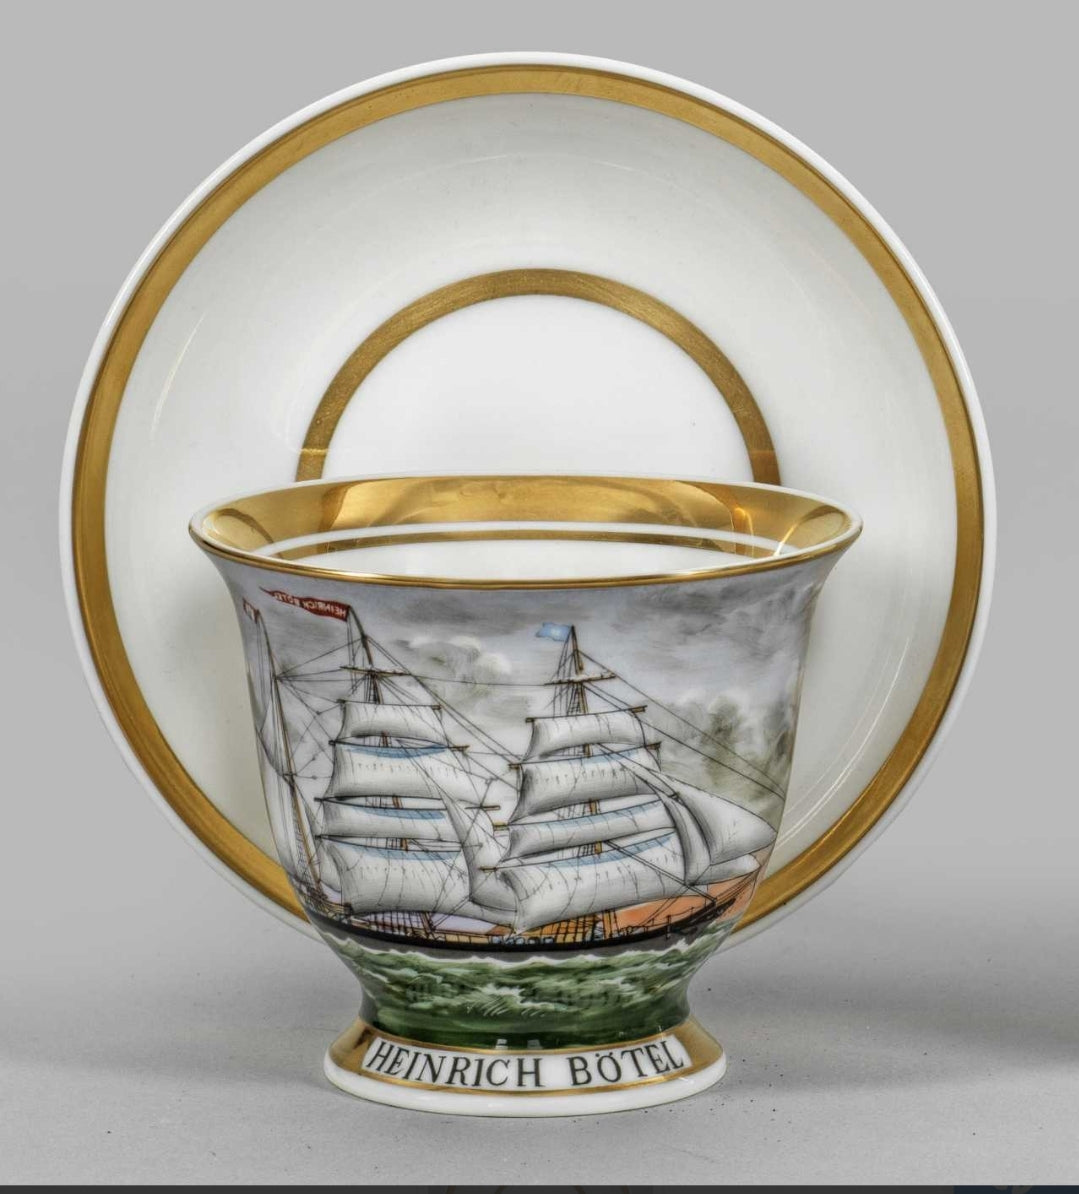 Captain's Cup 'HEINRICH BOTEL' Porcelai Hand Painted, by A. Warning Corner Hamburg